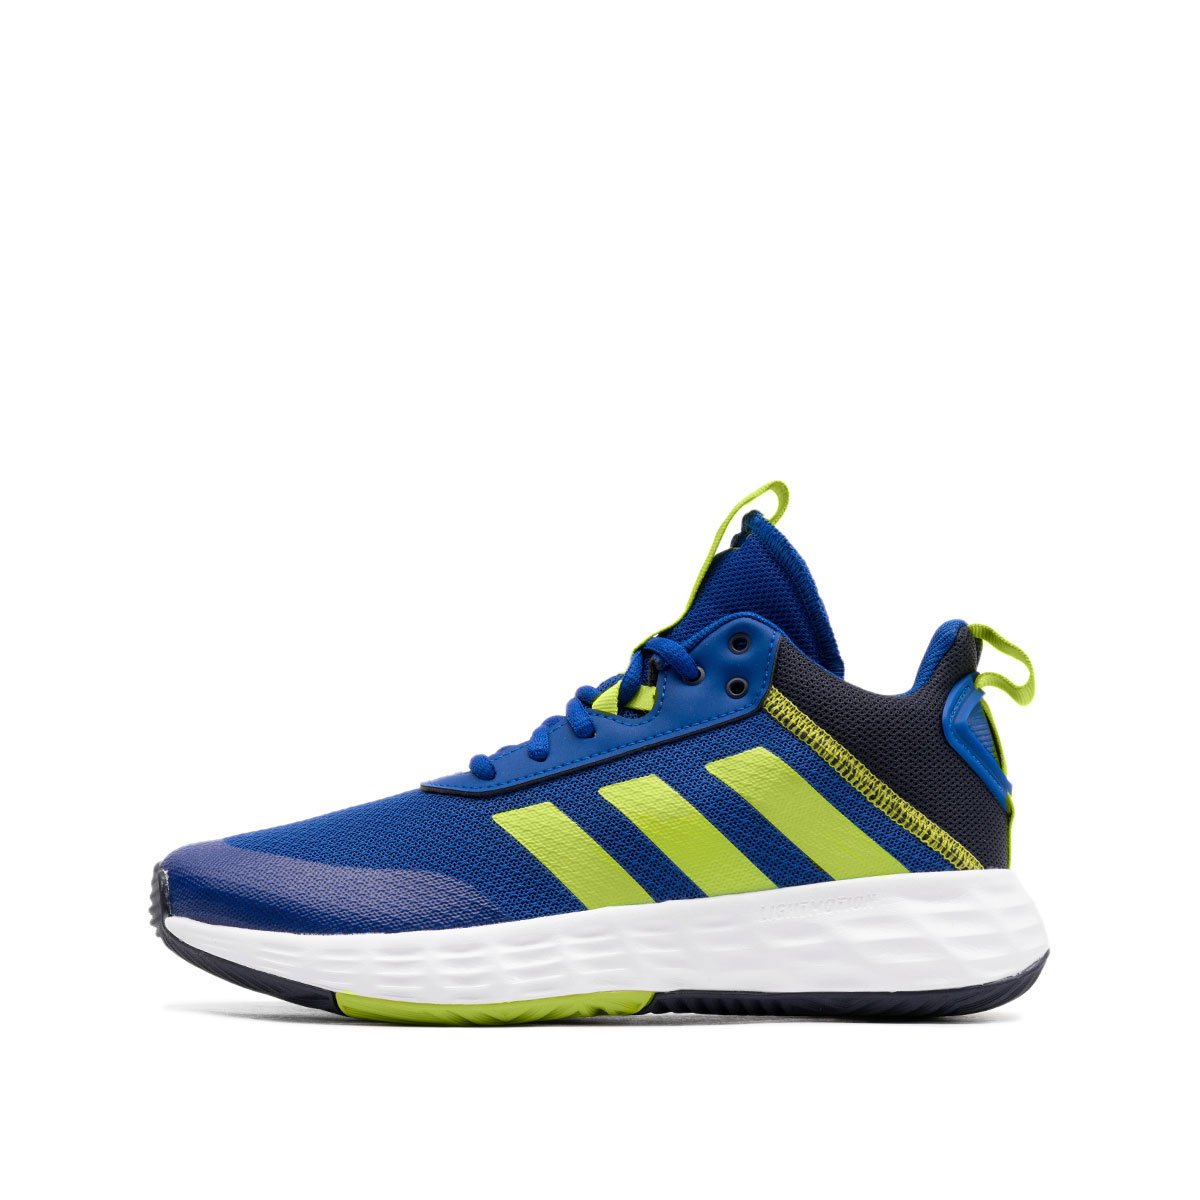 adidas Ownthegame 2.0  H01557